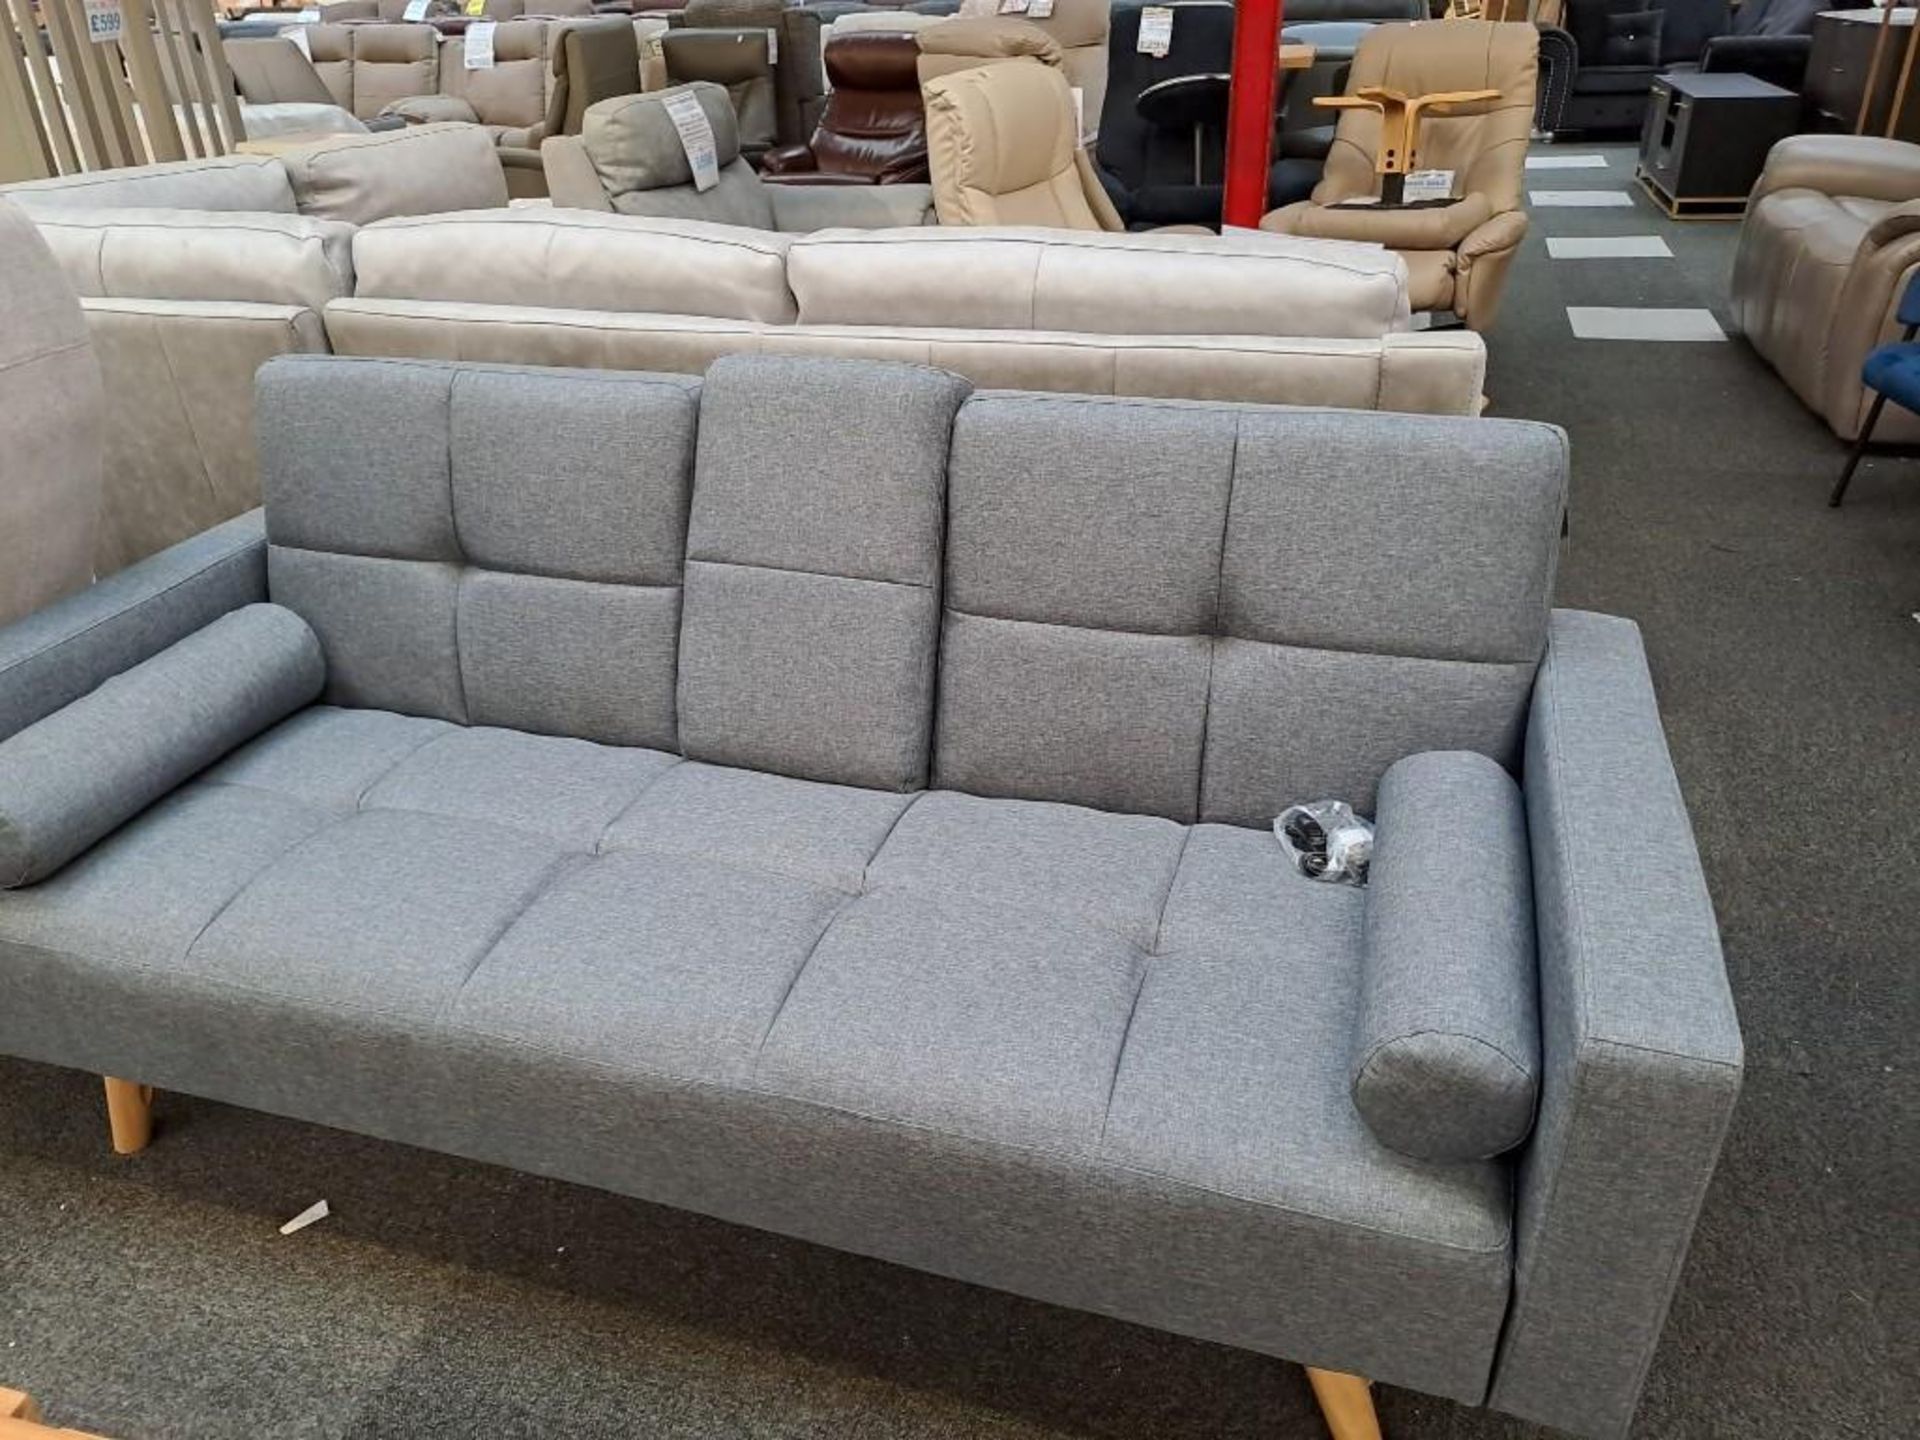 *BRAND NEW* Heavy Duty Clic Clac sofa bed with 2 bolsters, dual usb & charger socket. - Image 2 of 11